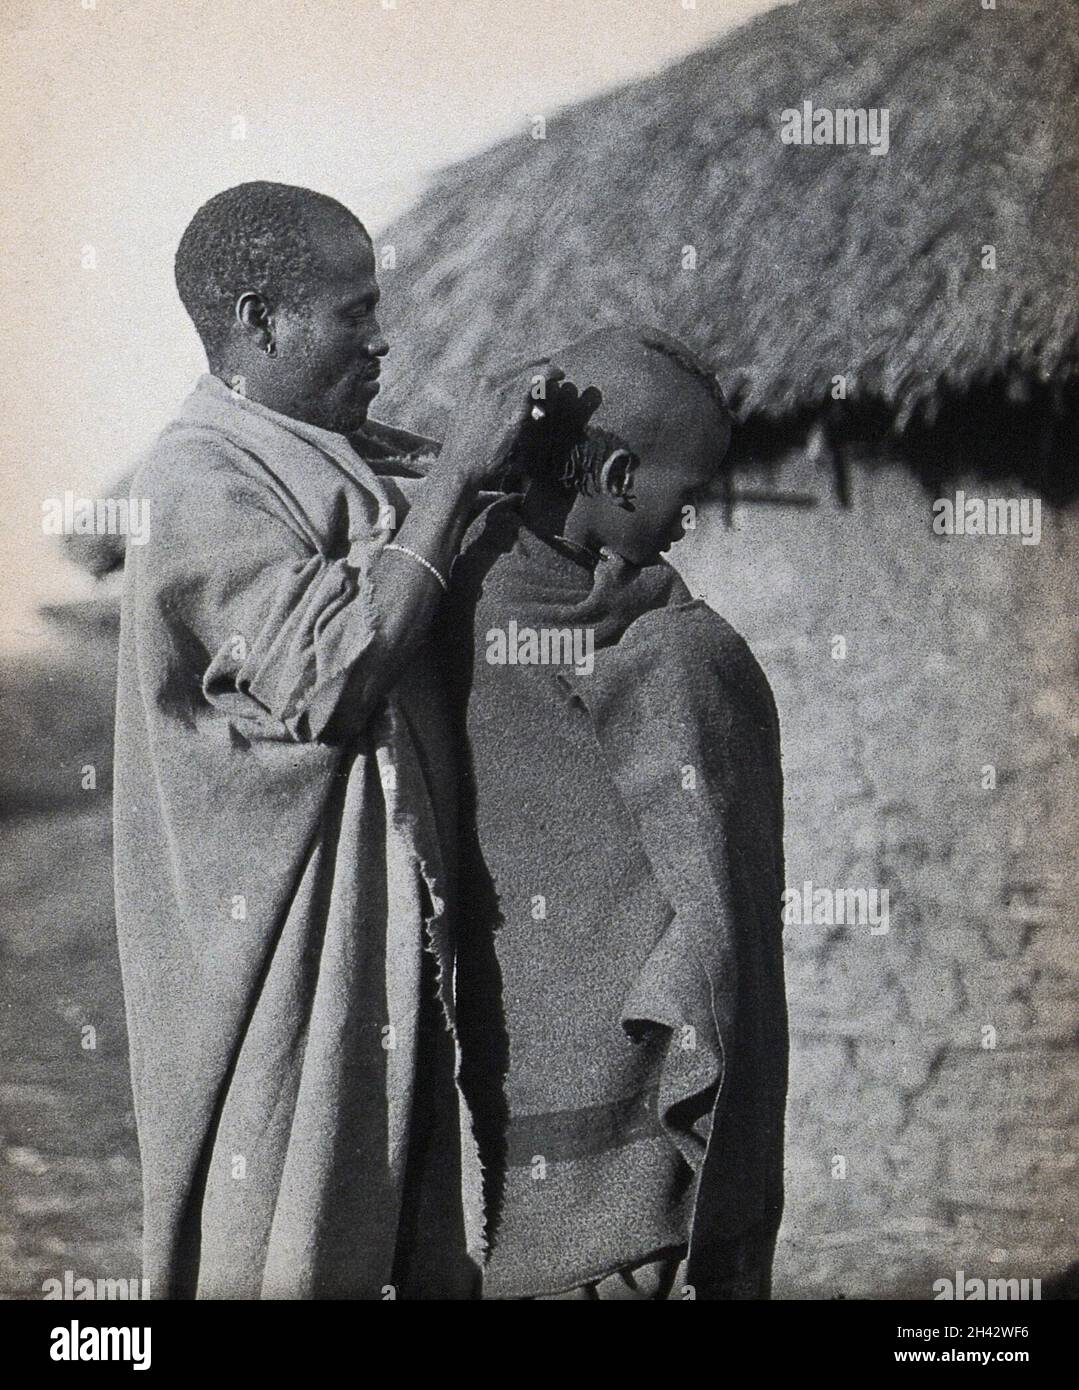 South Africa: a Pondo tribesman attends to the hairstyle of a fellow tribesman. Photograph, ca. 1900. Stock Photo